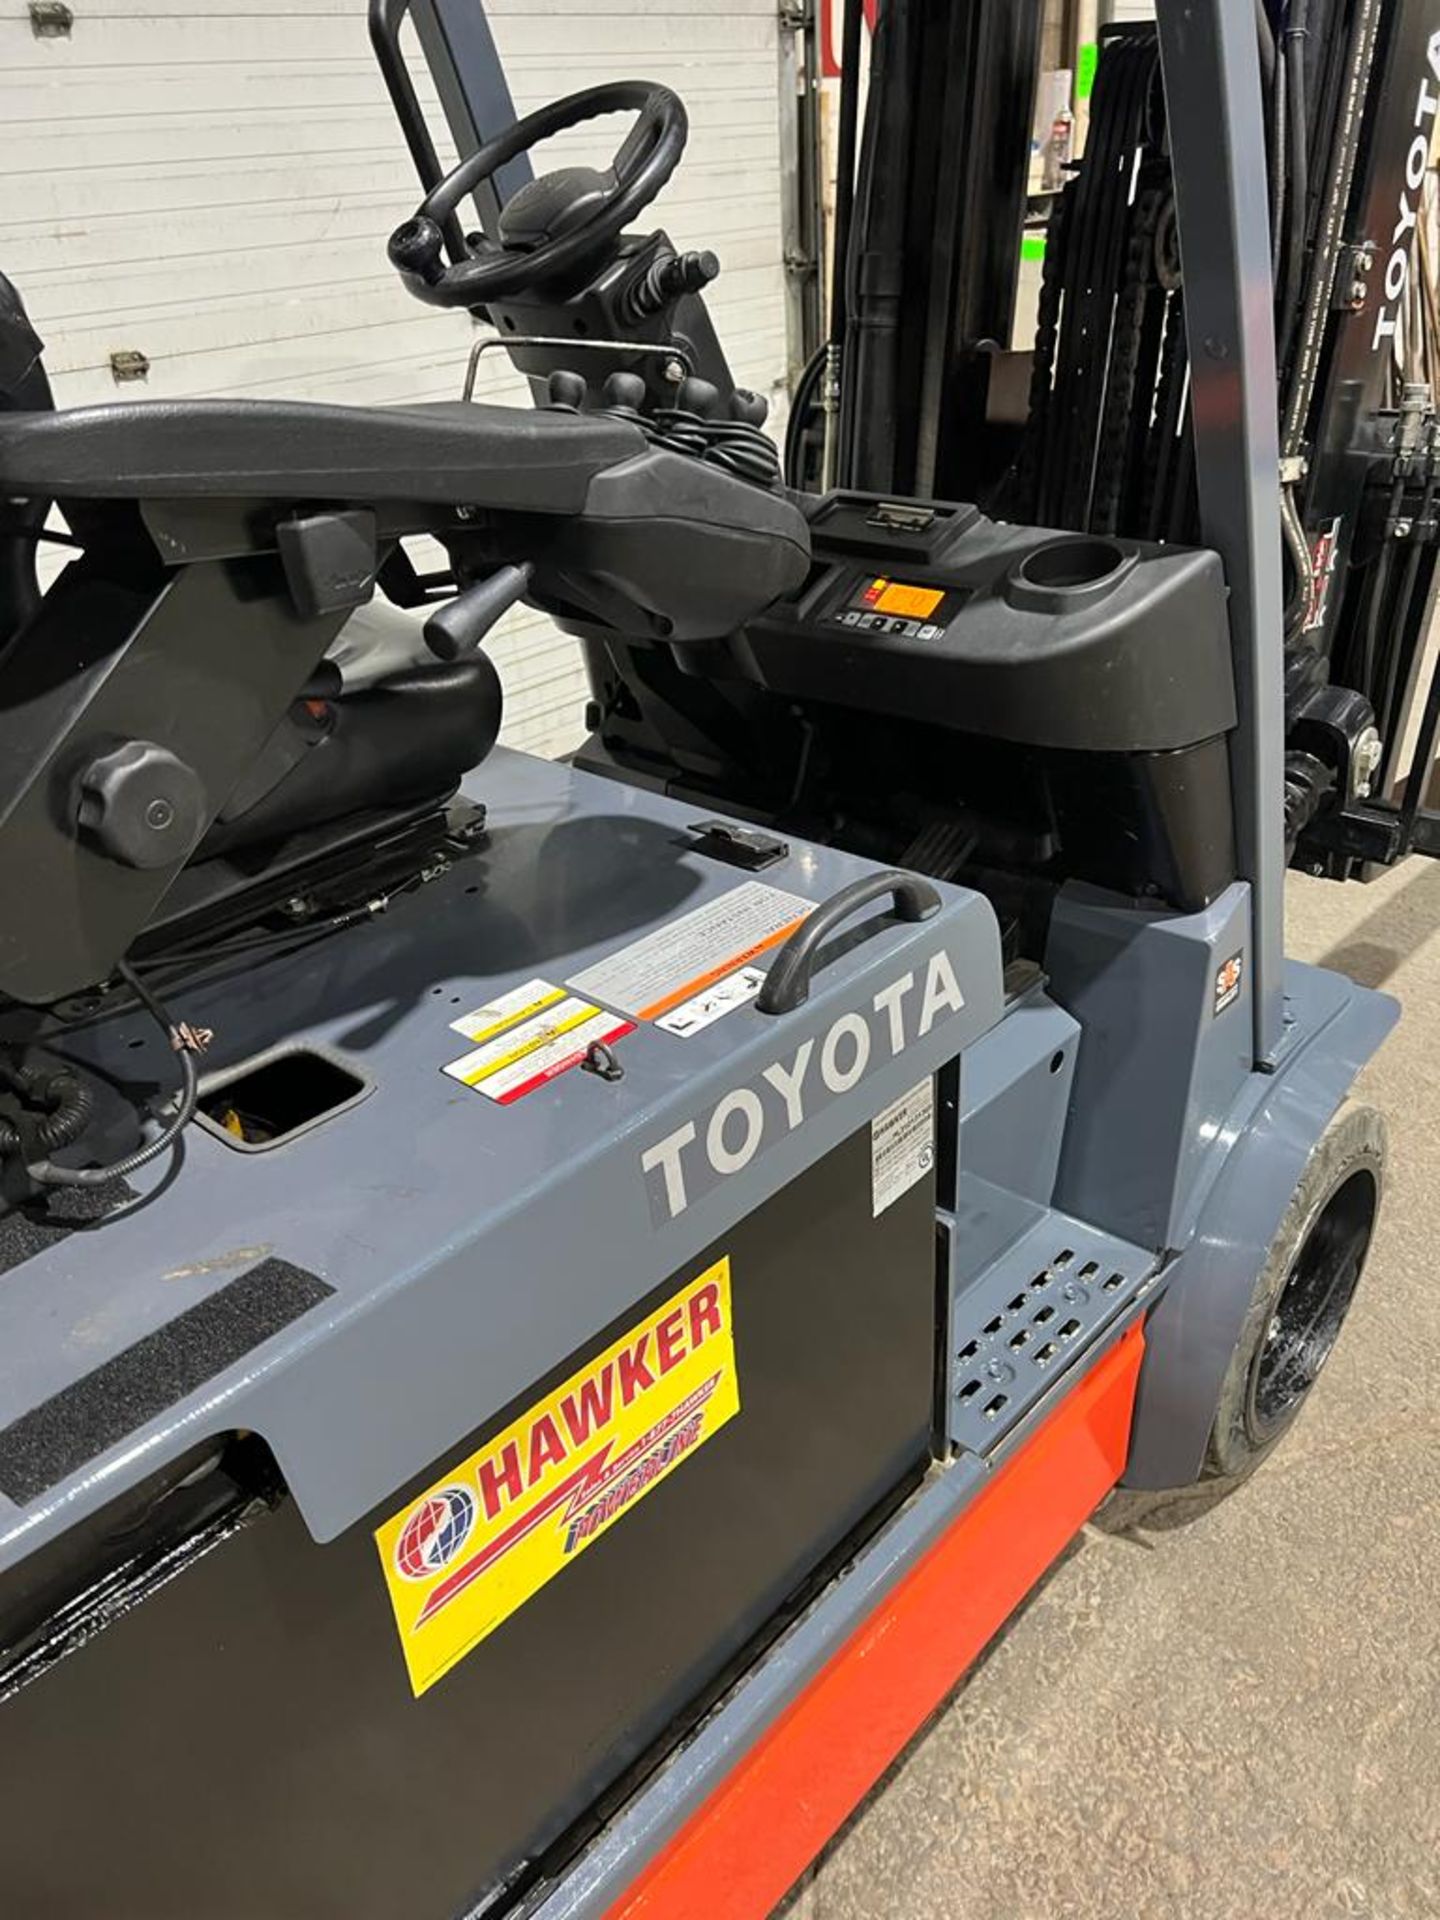 2015 Toyota 6,000lbs Capacity Electric Forklift with Sideshift & Plumbed for Fork Positioner - 48V - Image 4 of 5